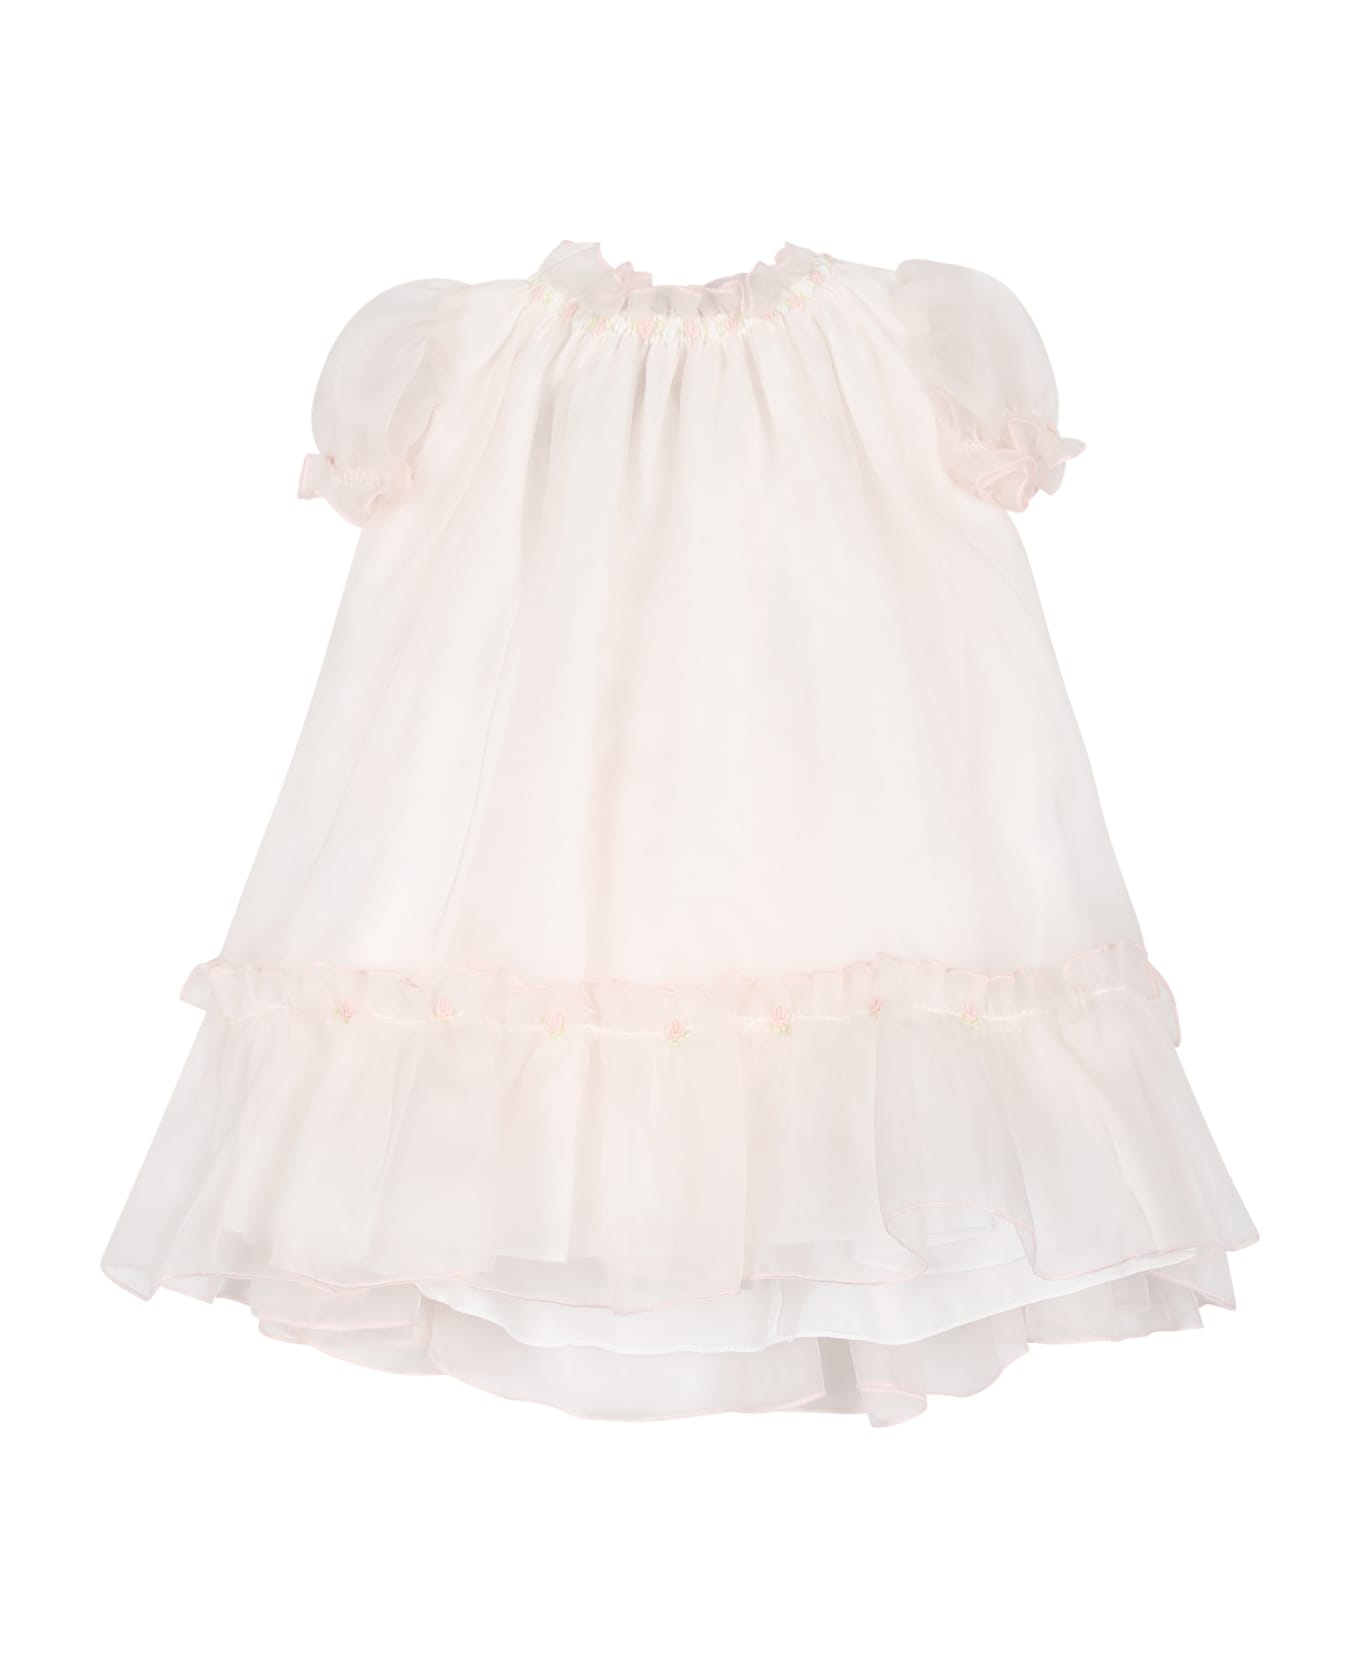 La stupenderia Pink Dress For Baby Girl With Flowers Embroidered - Pink ウェア